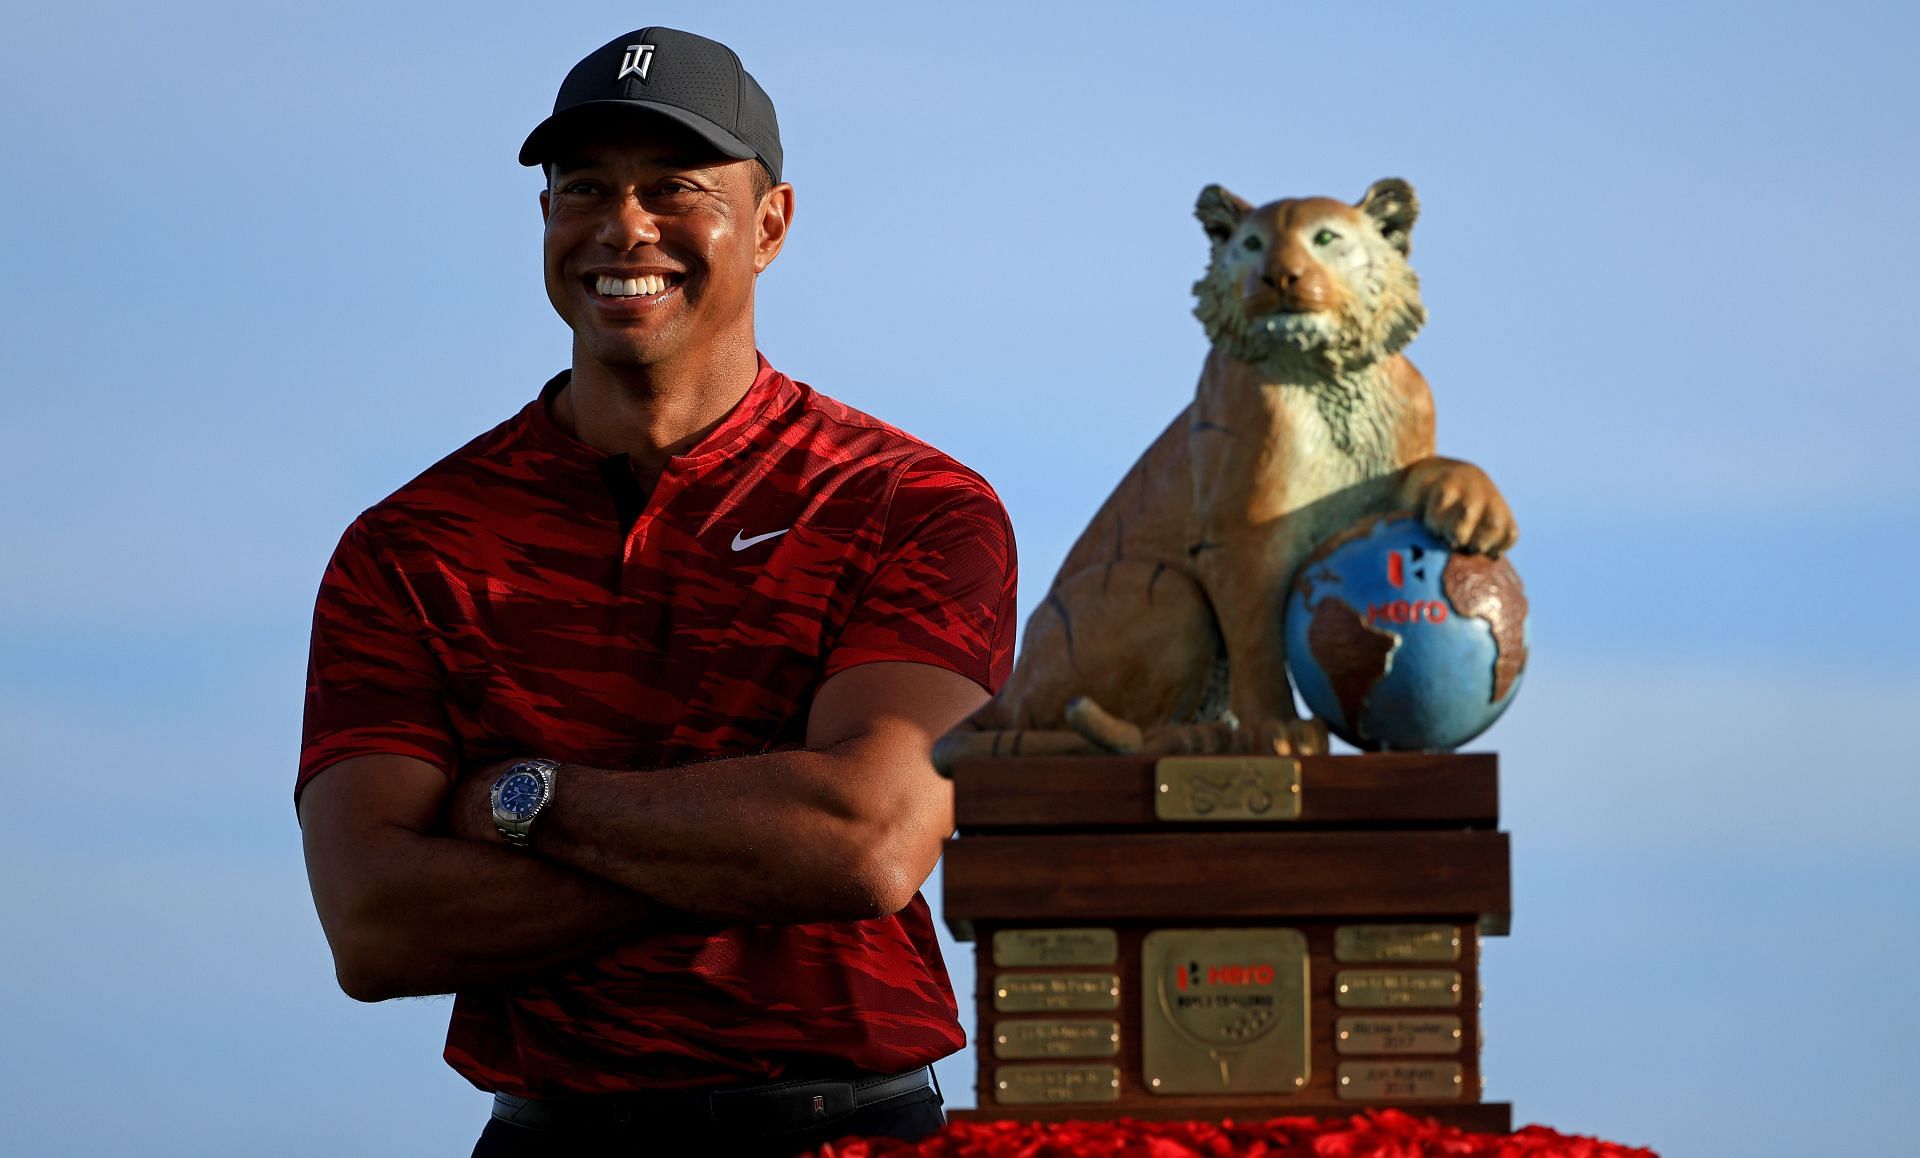 Tiger Woods at the 2021 Hero World Challenge - Final Round (Image via Mike Ehrmann/Getty Images)